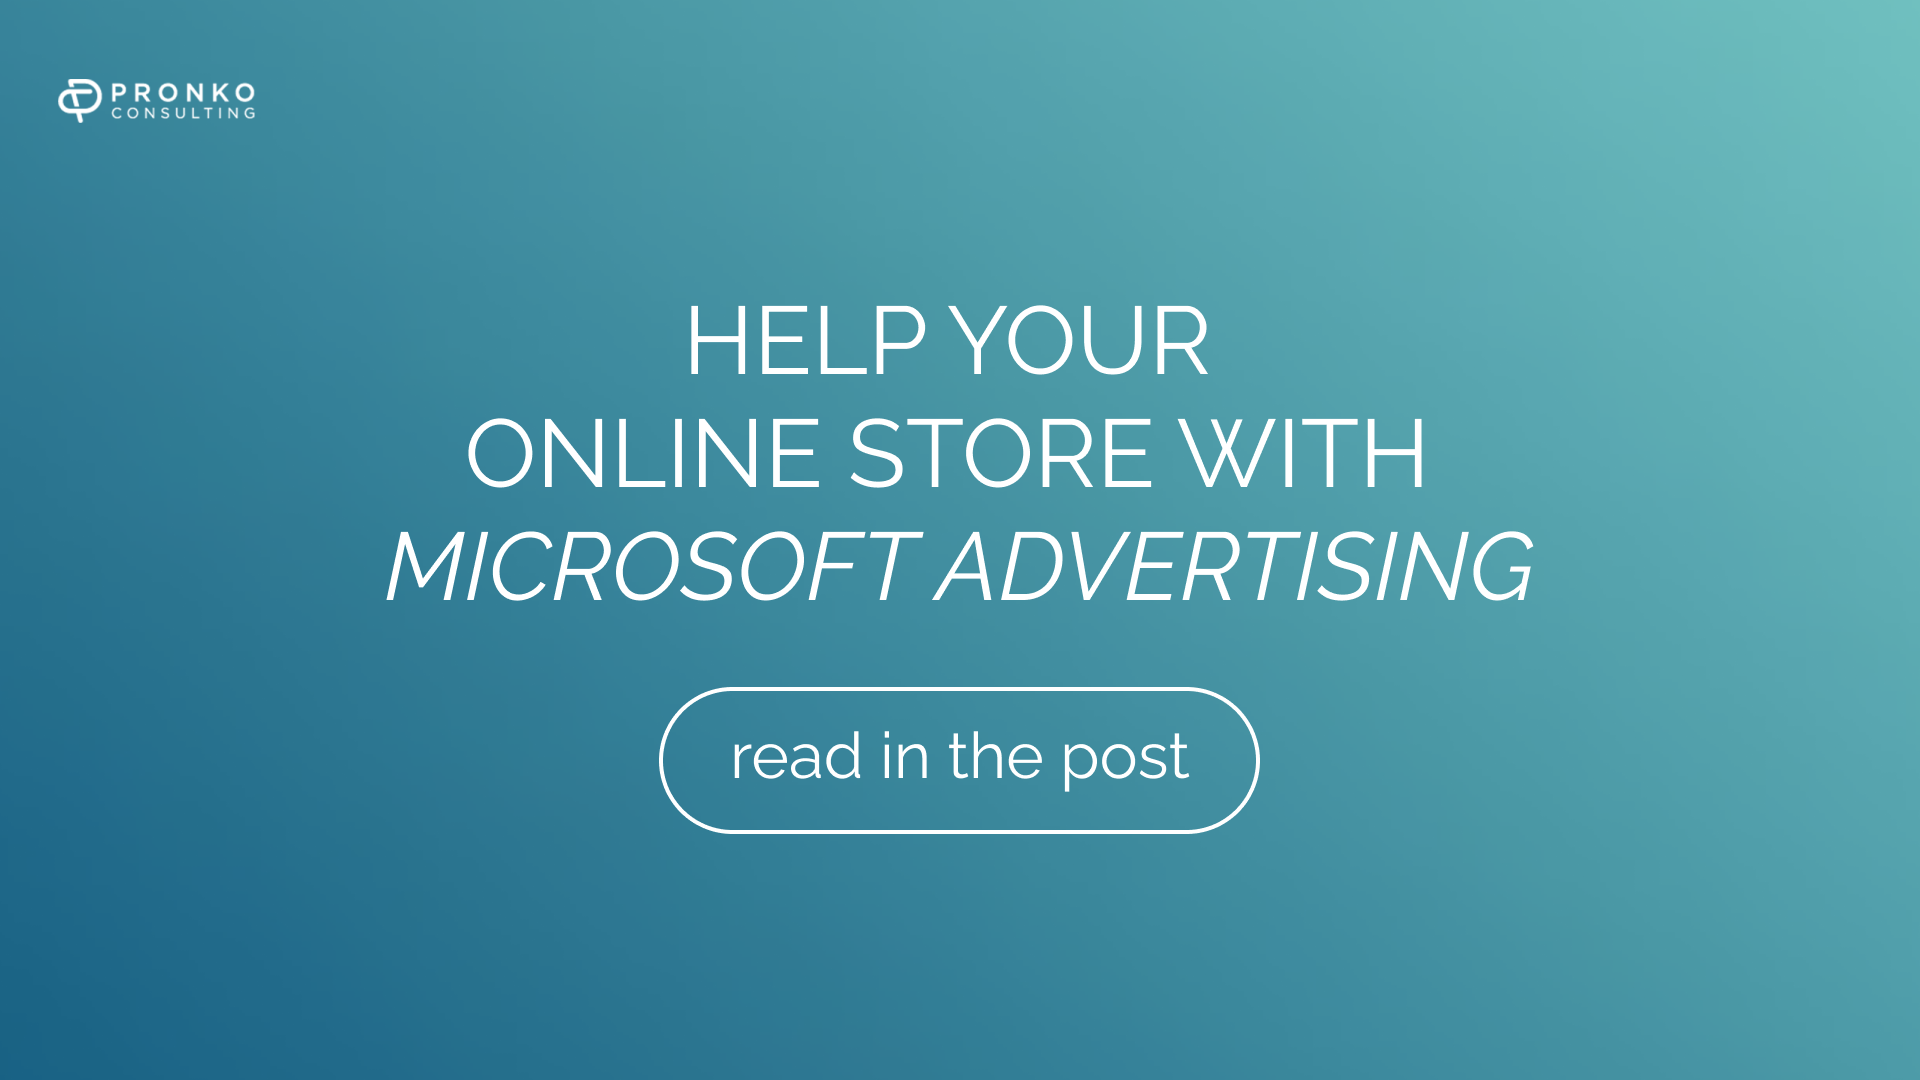 How can Microsoft Advertising help your online store?